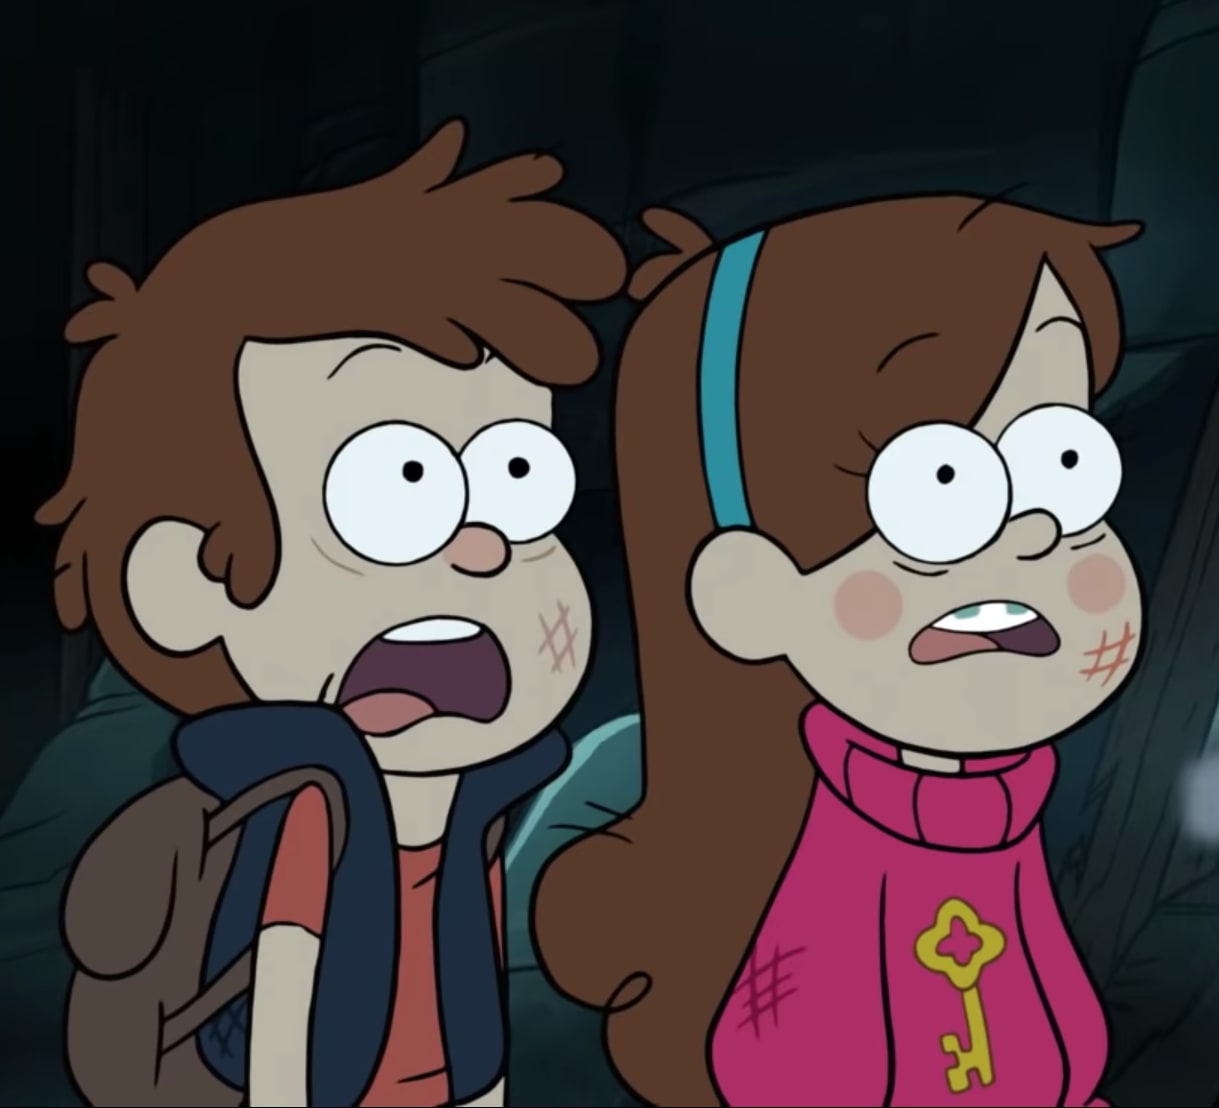 Pictures Of Dipper And Mabel porr videos